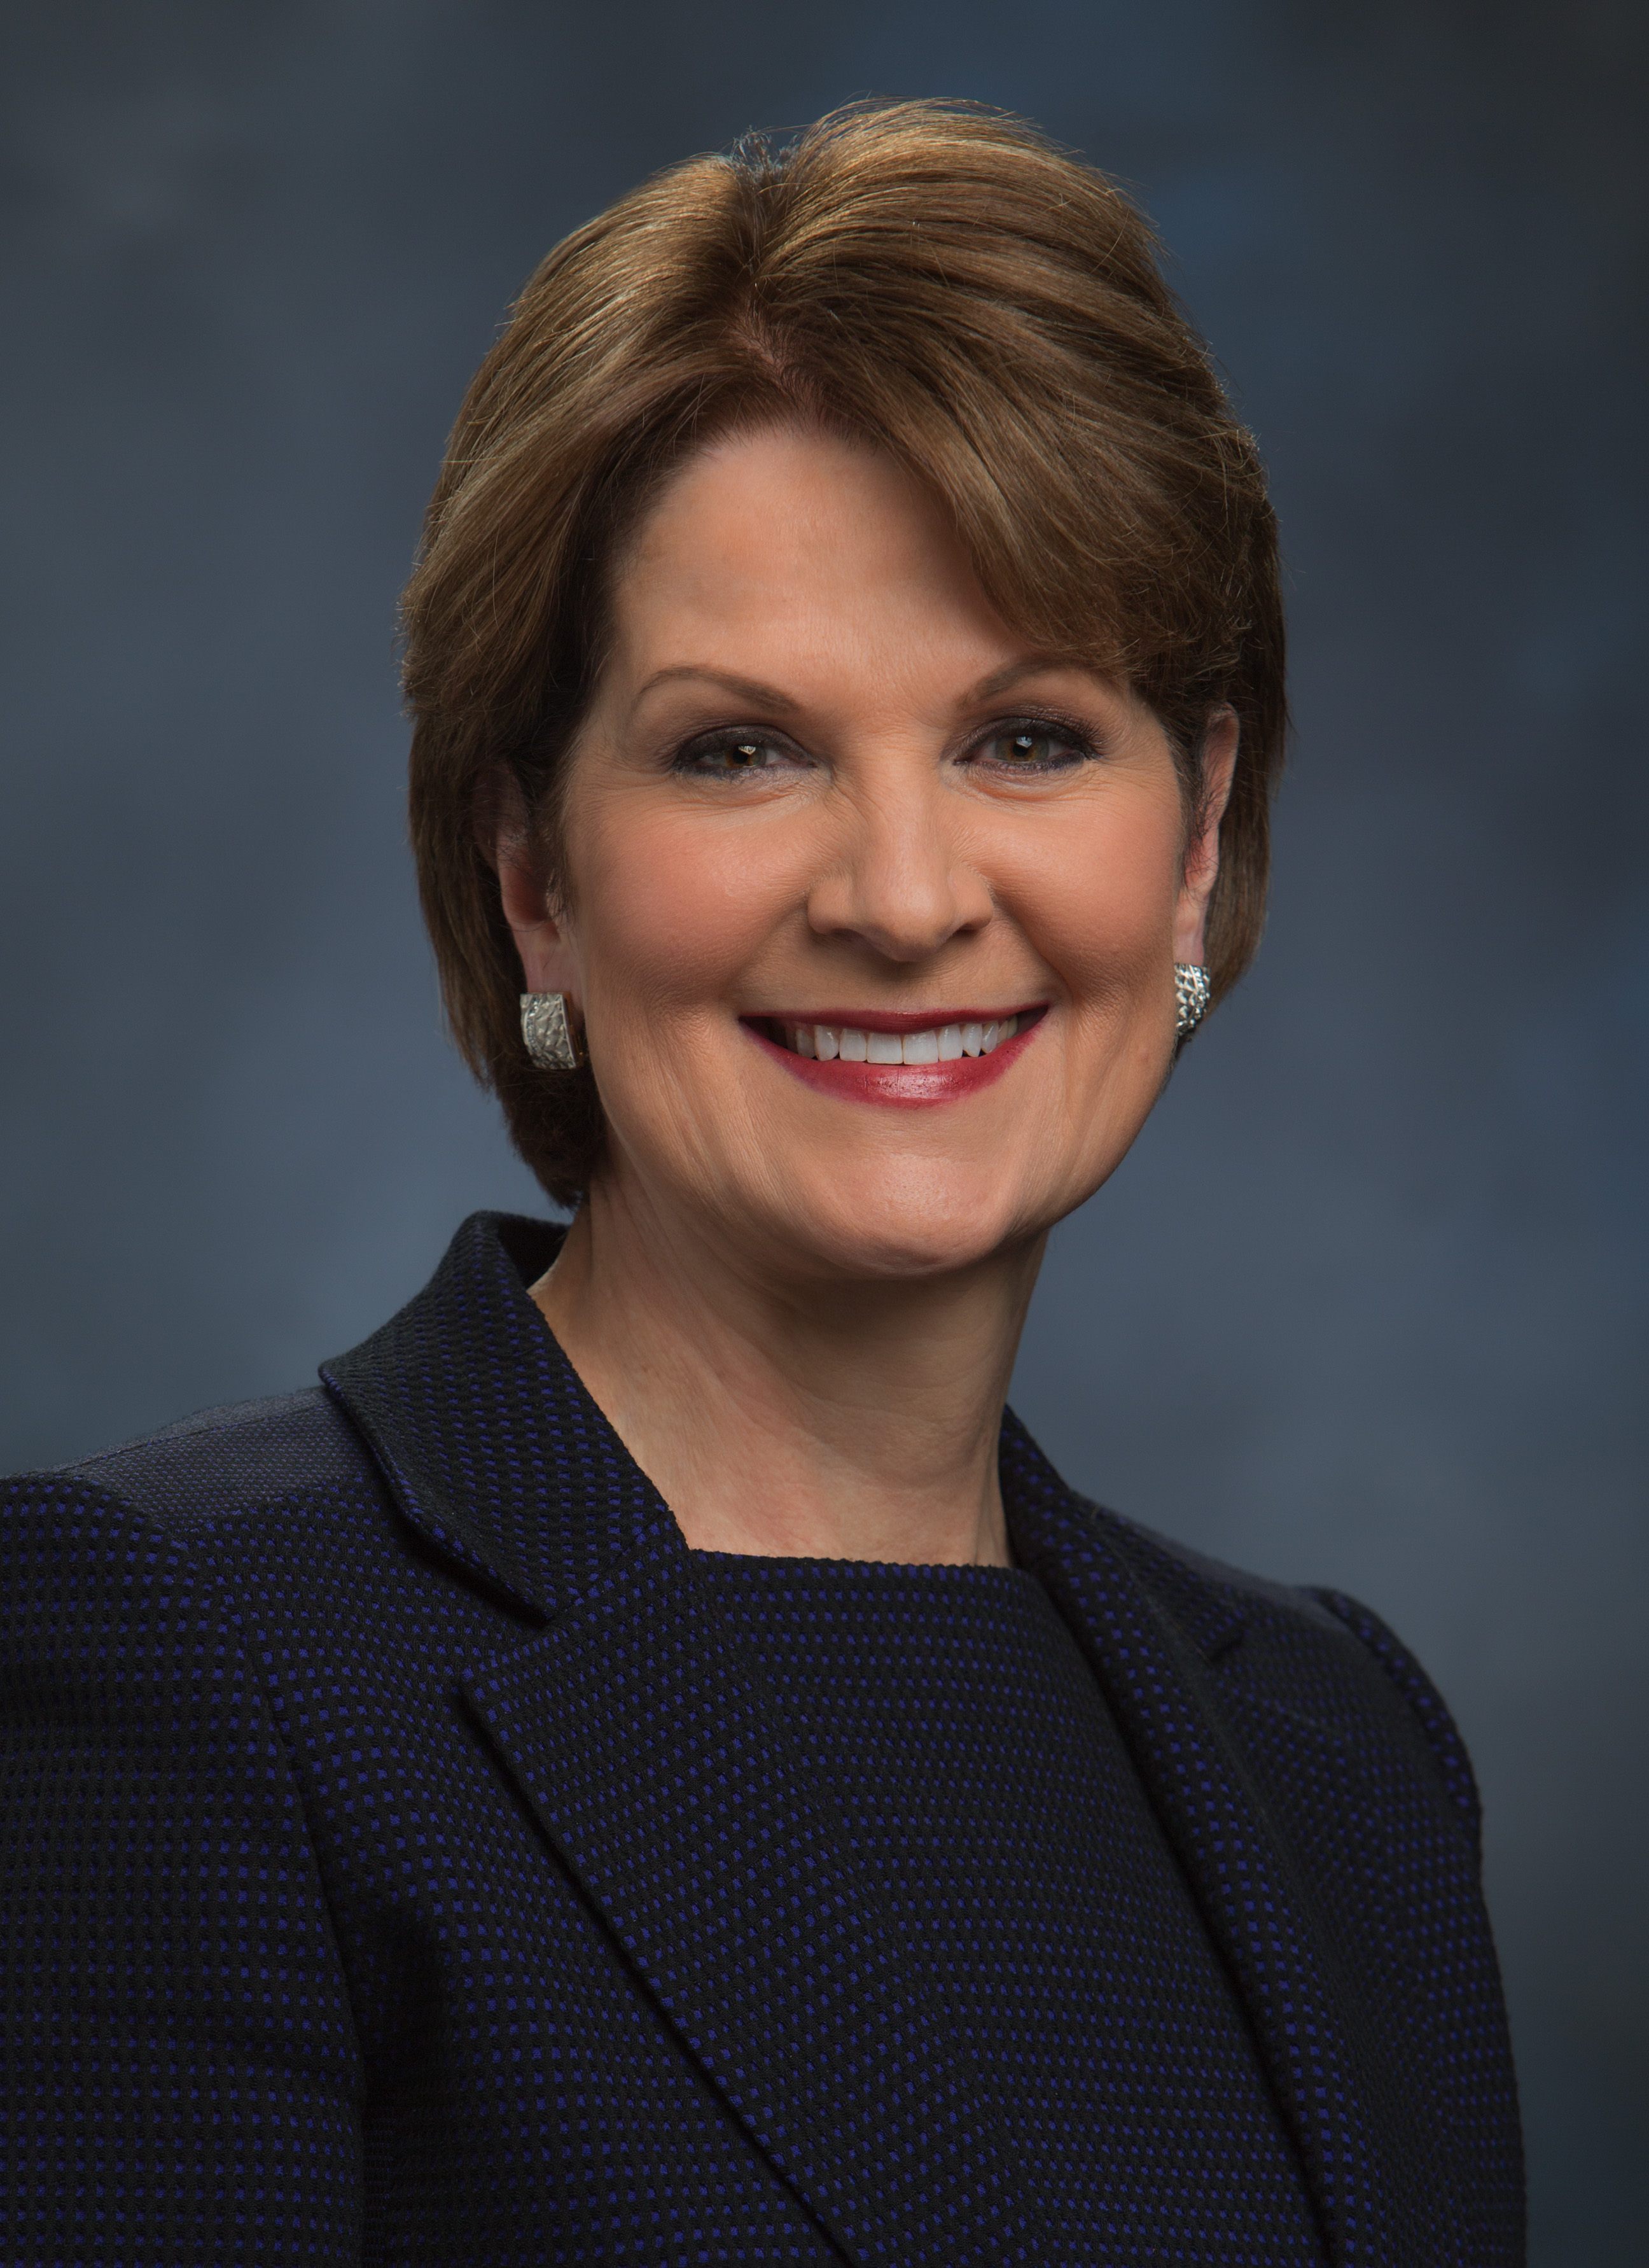 So Far, Marillyn Hewson Tops The List Of Highest-Paid Female C.E.O.s – Although The “Race” Continues